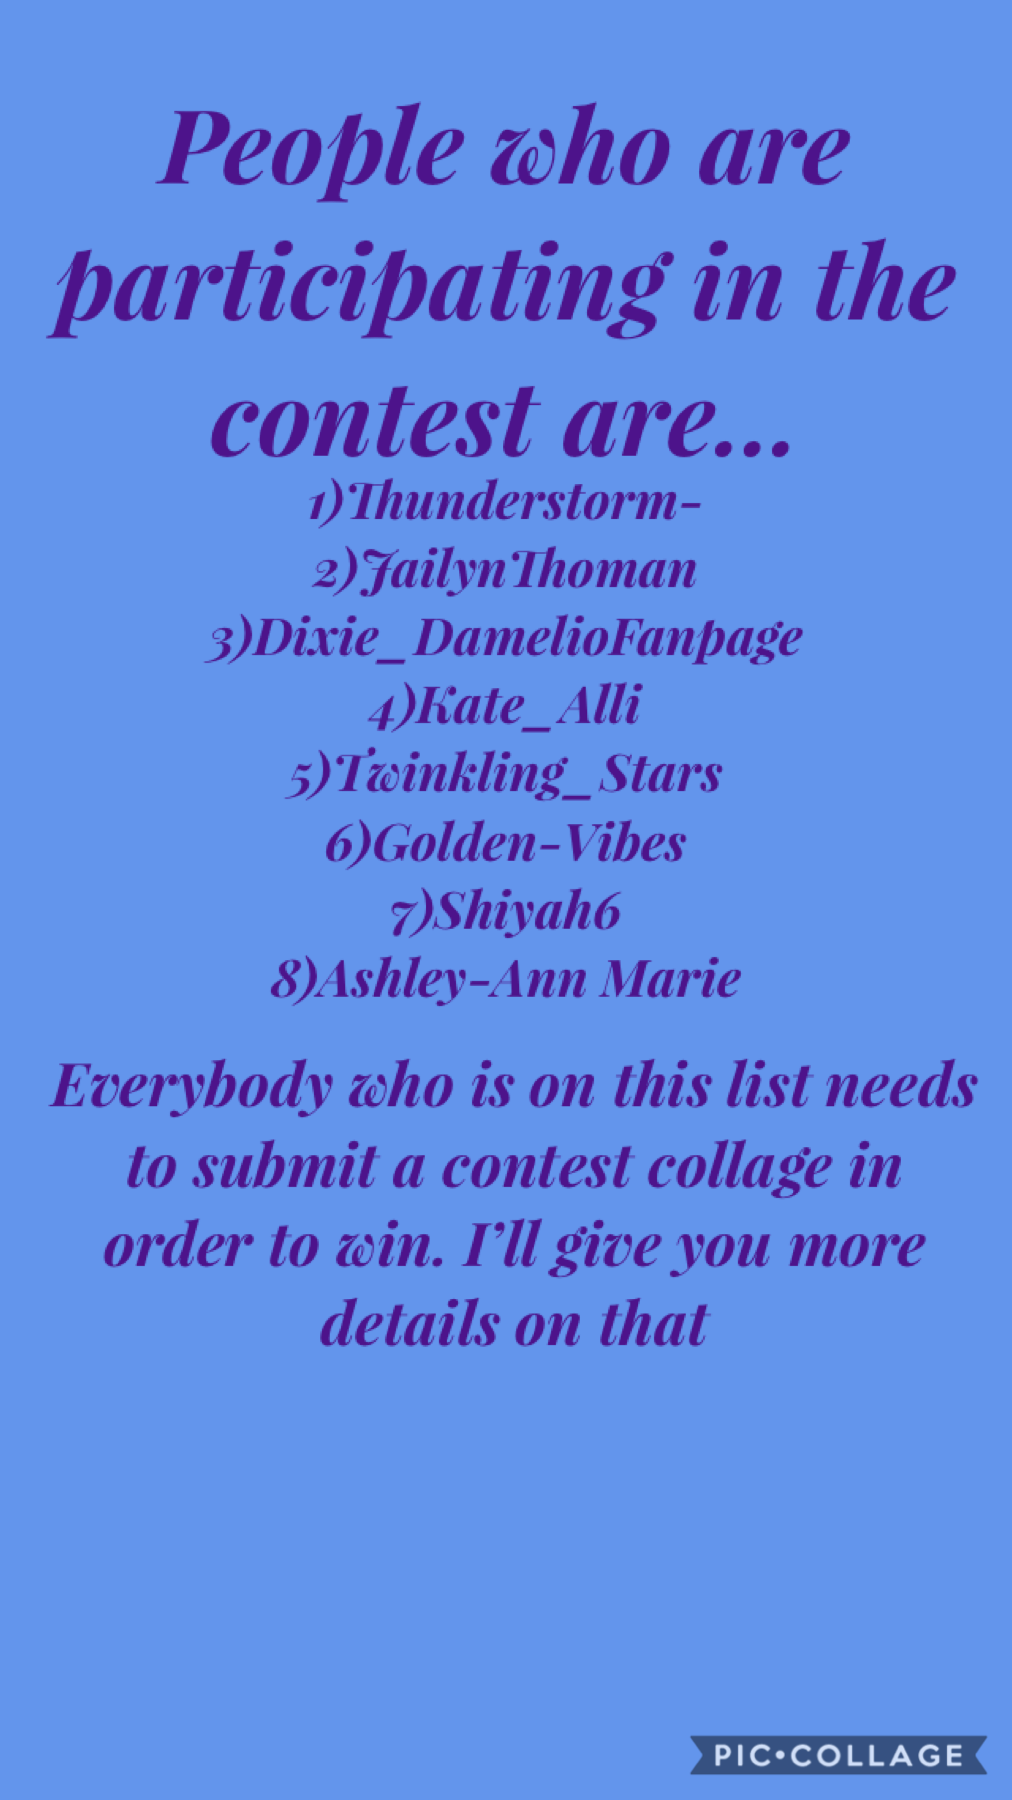 Contest collage will be posted soon